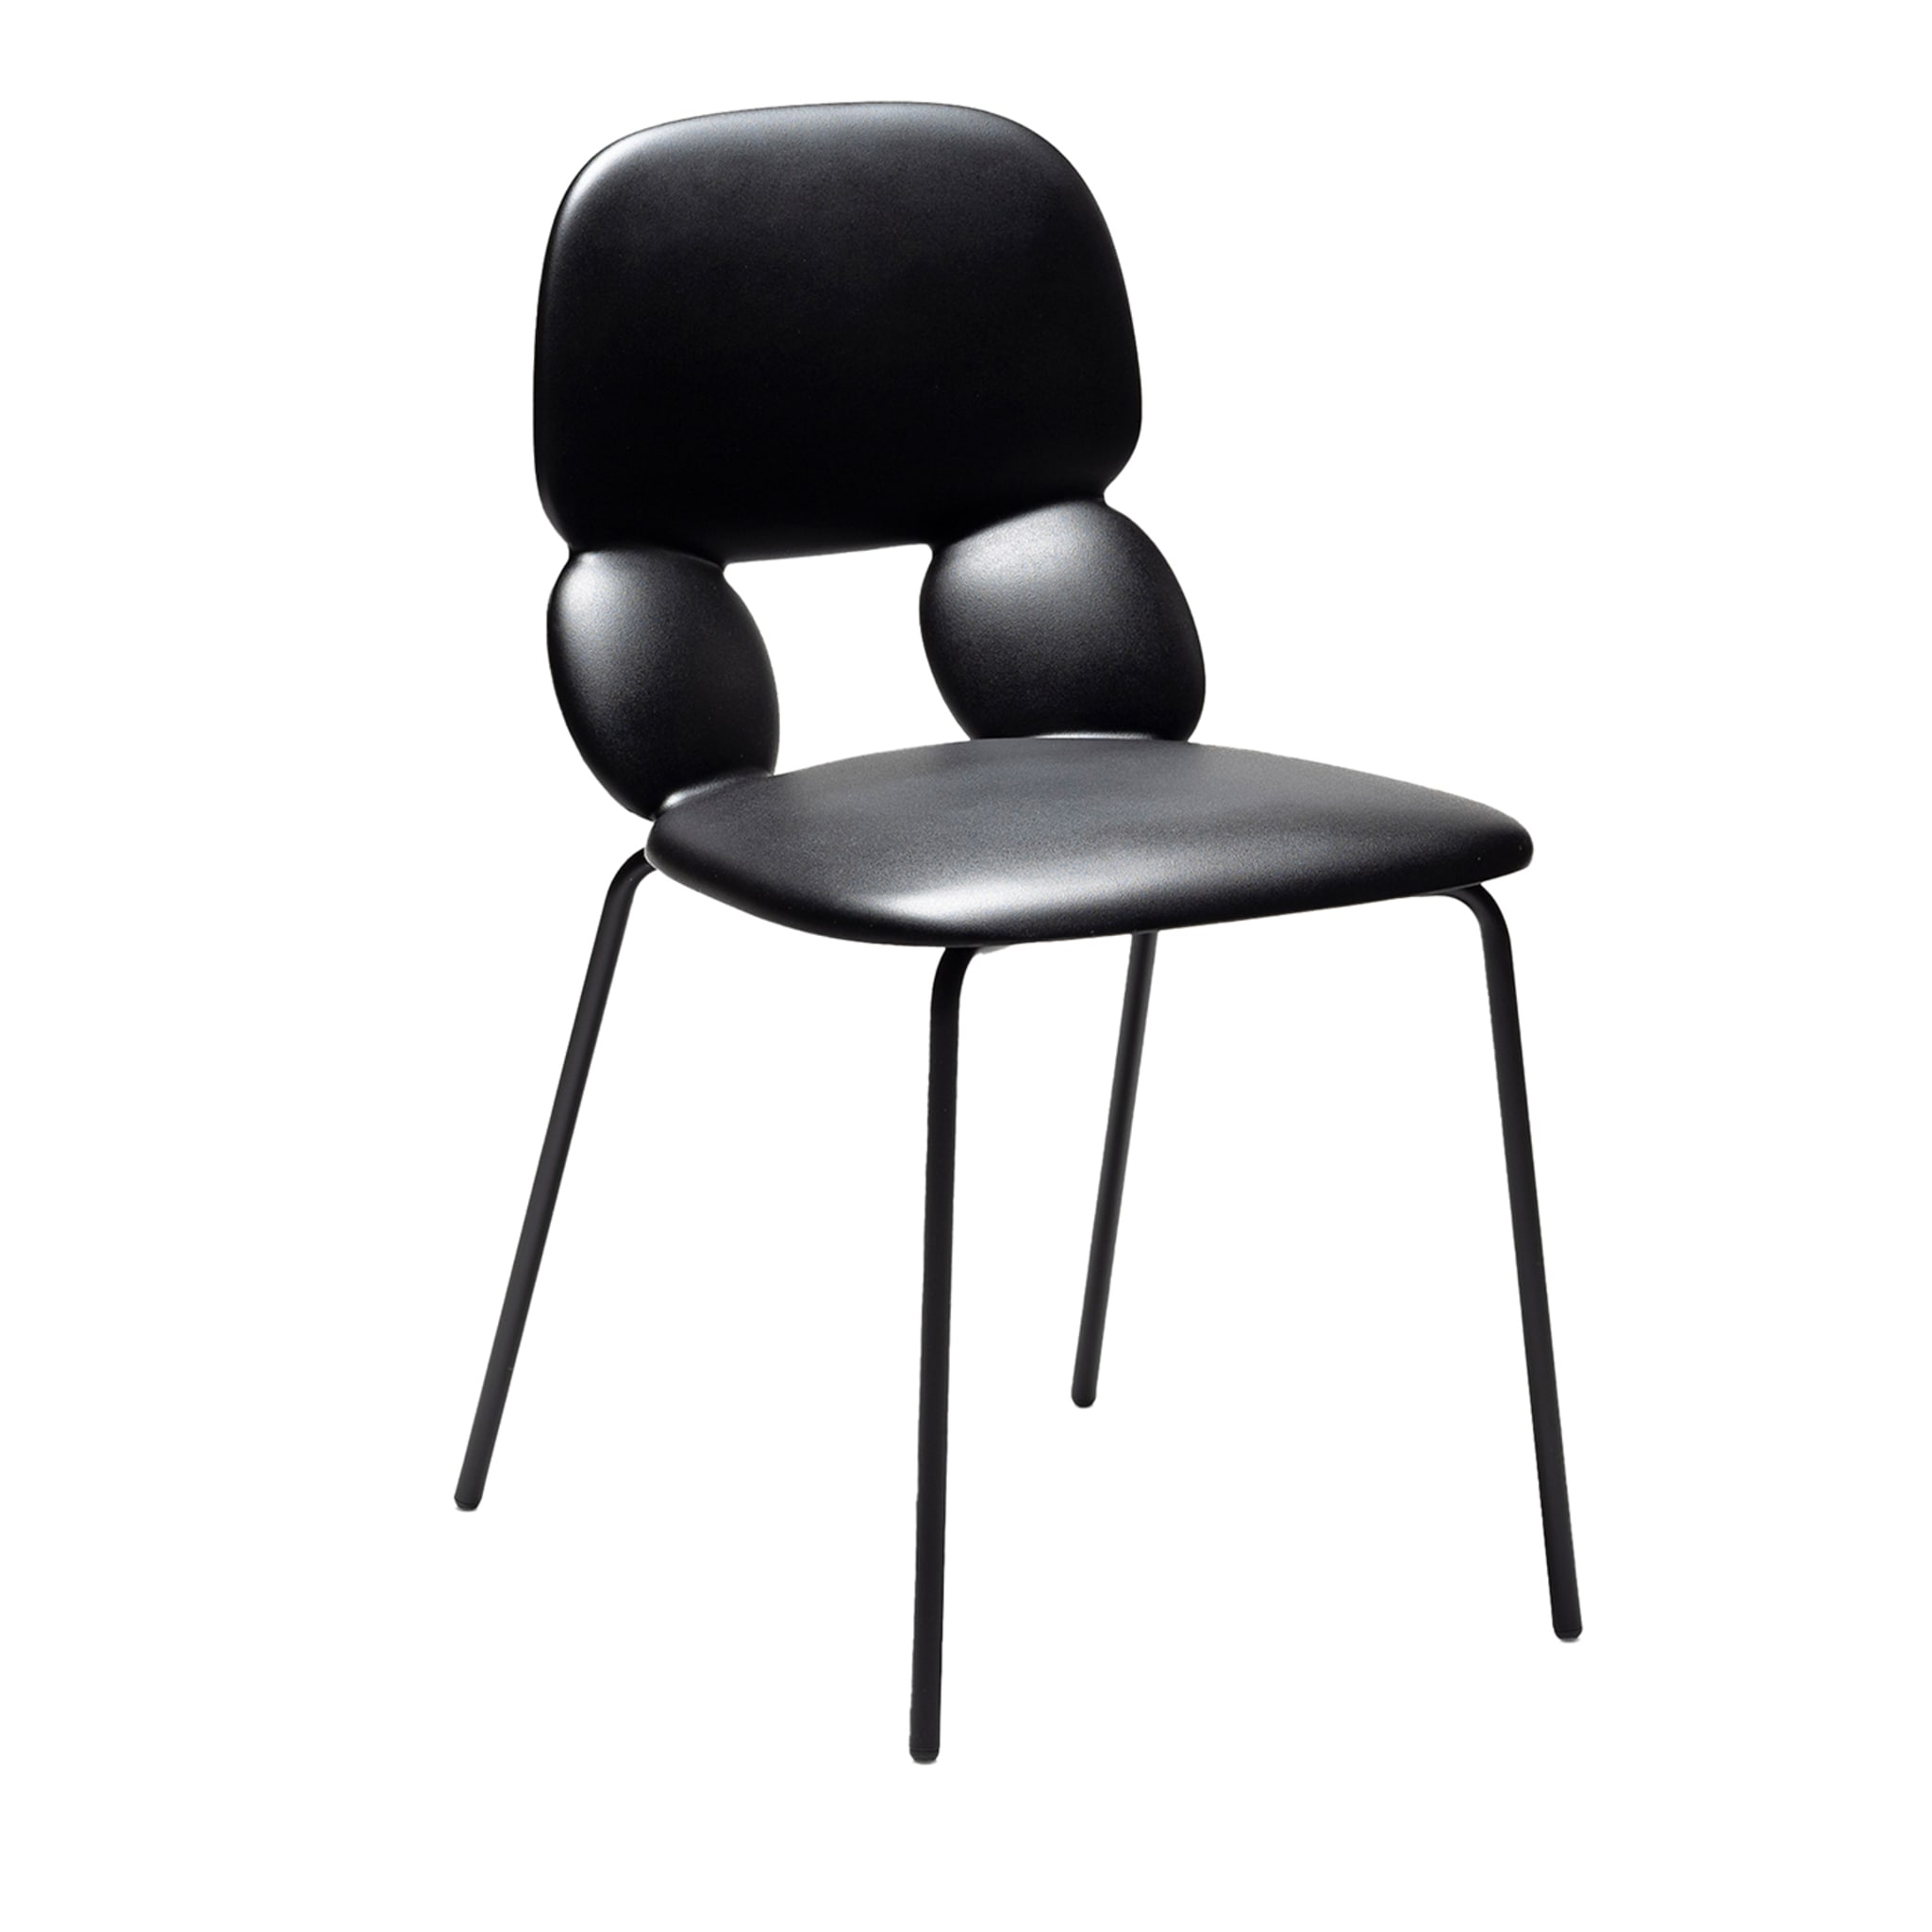 Nube S Black Chair by Roberto Paoli - Main view